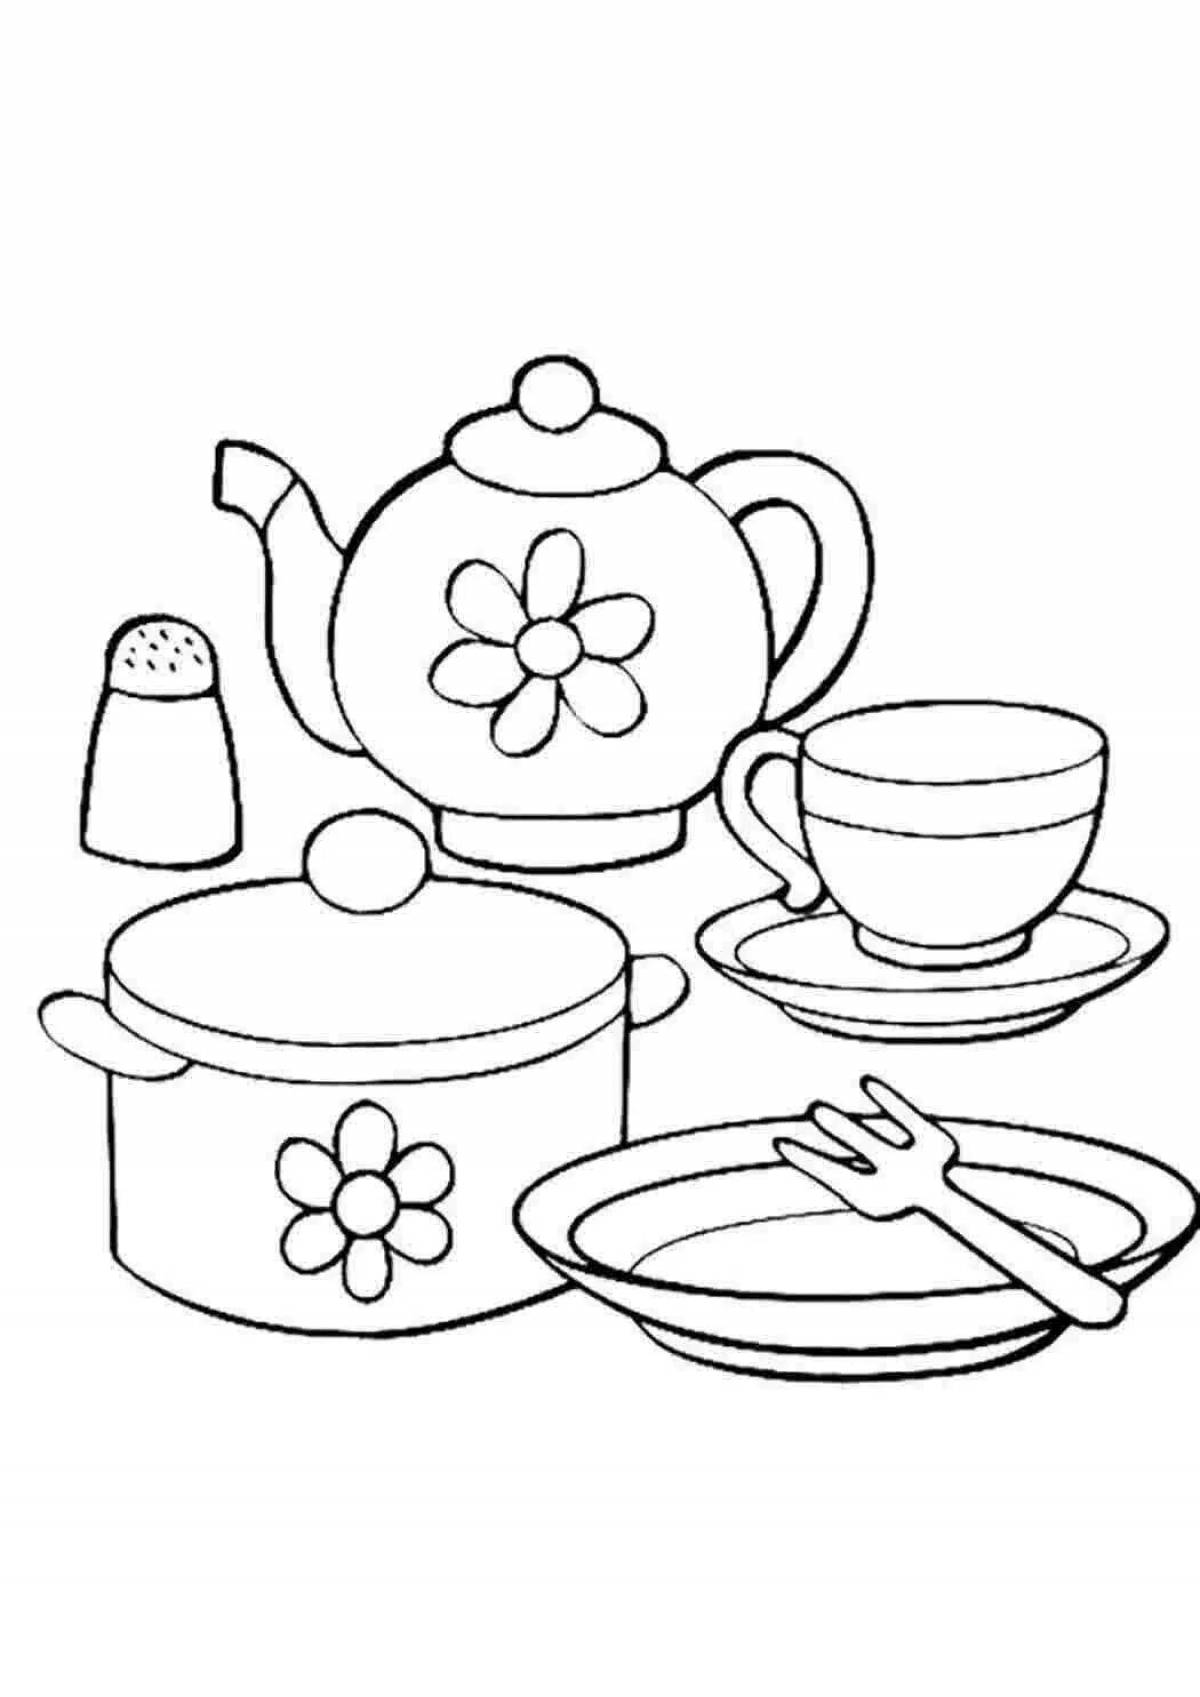 Colourful tableware coloring book